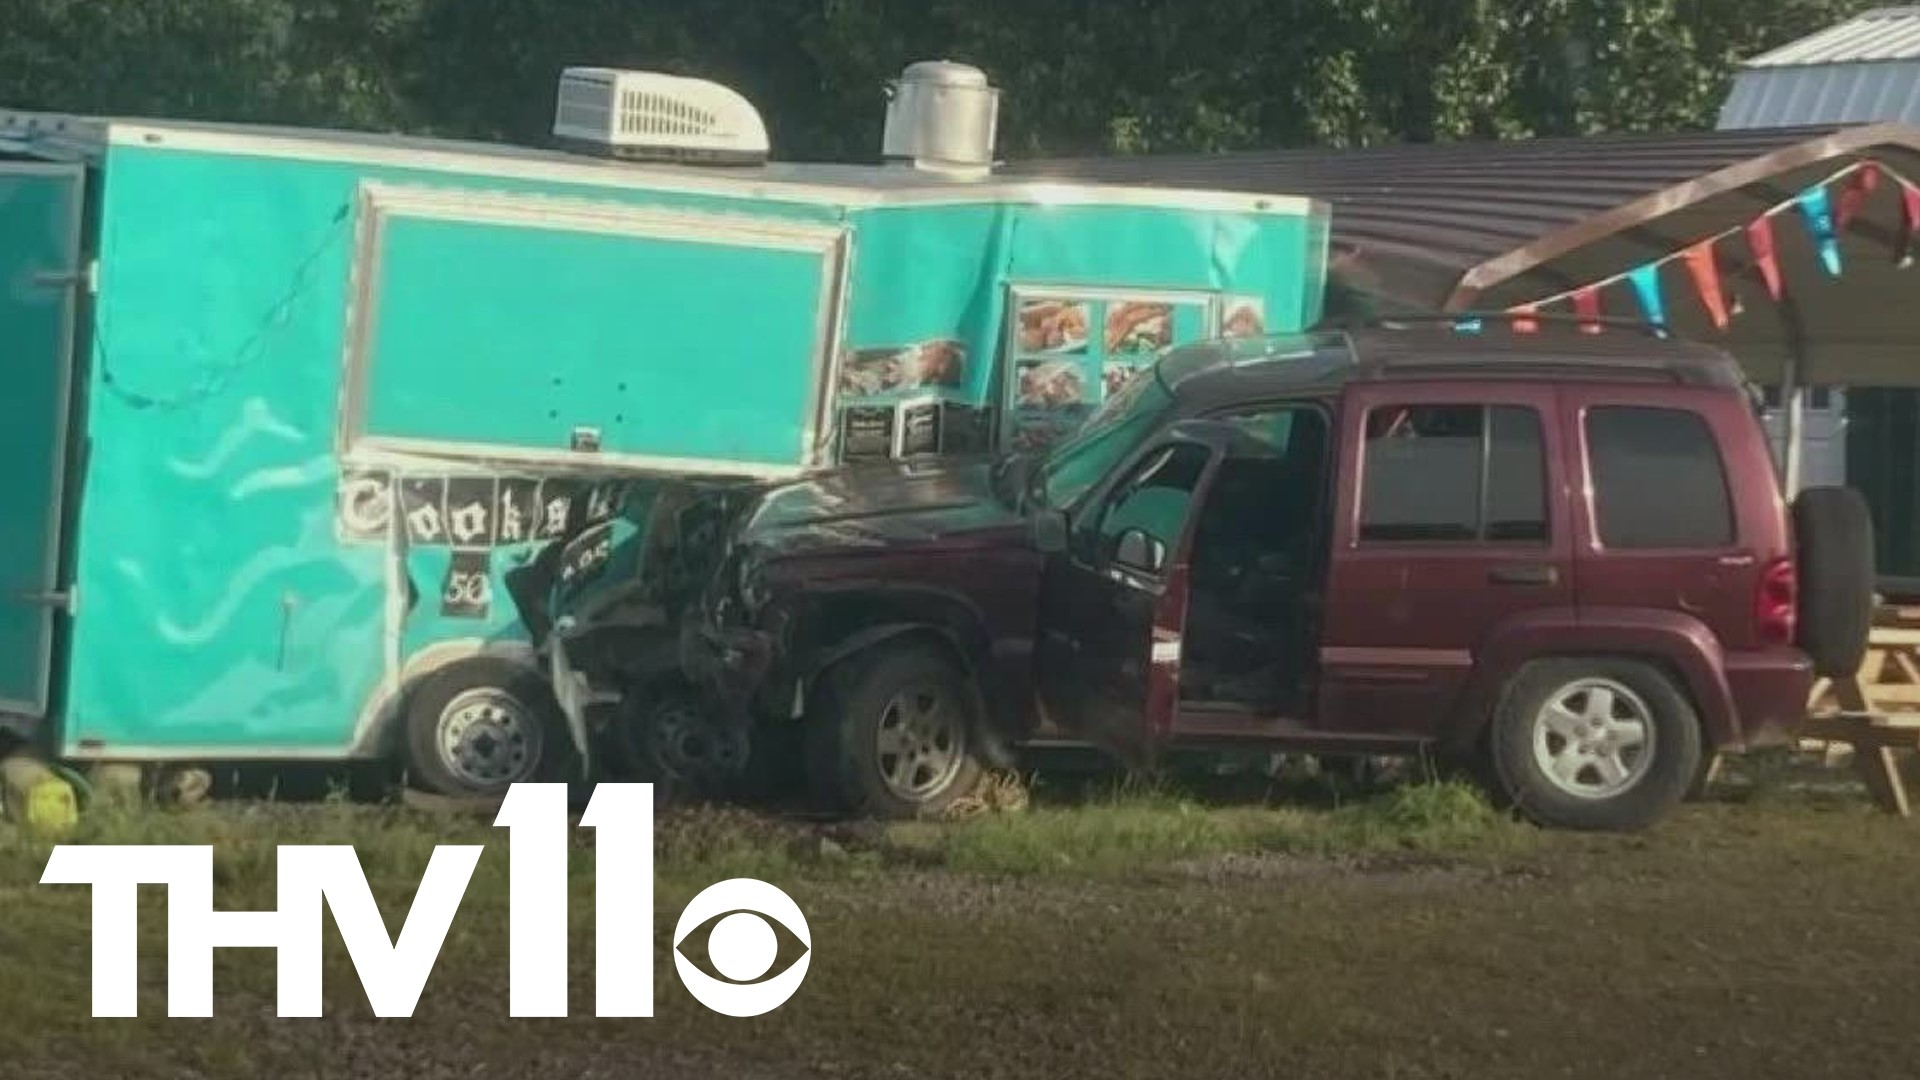 A Cabot family is trying to move forward after a car crashed into their food truck.